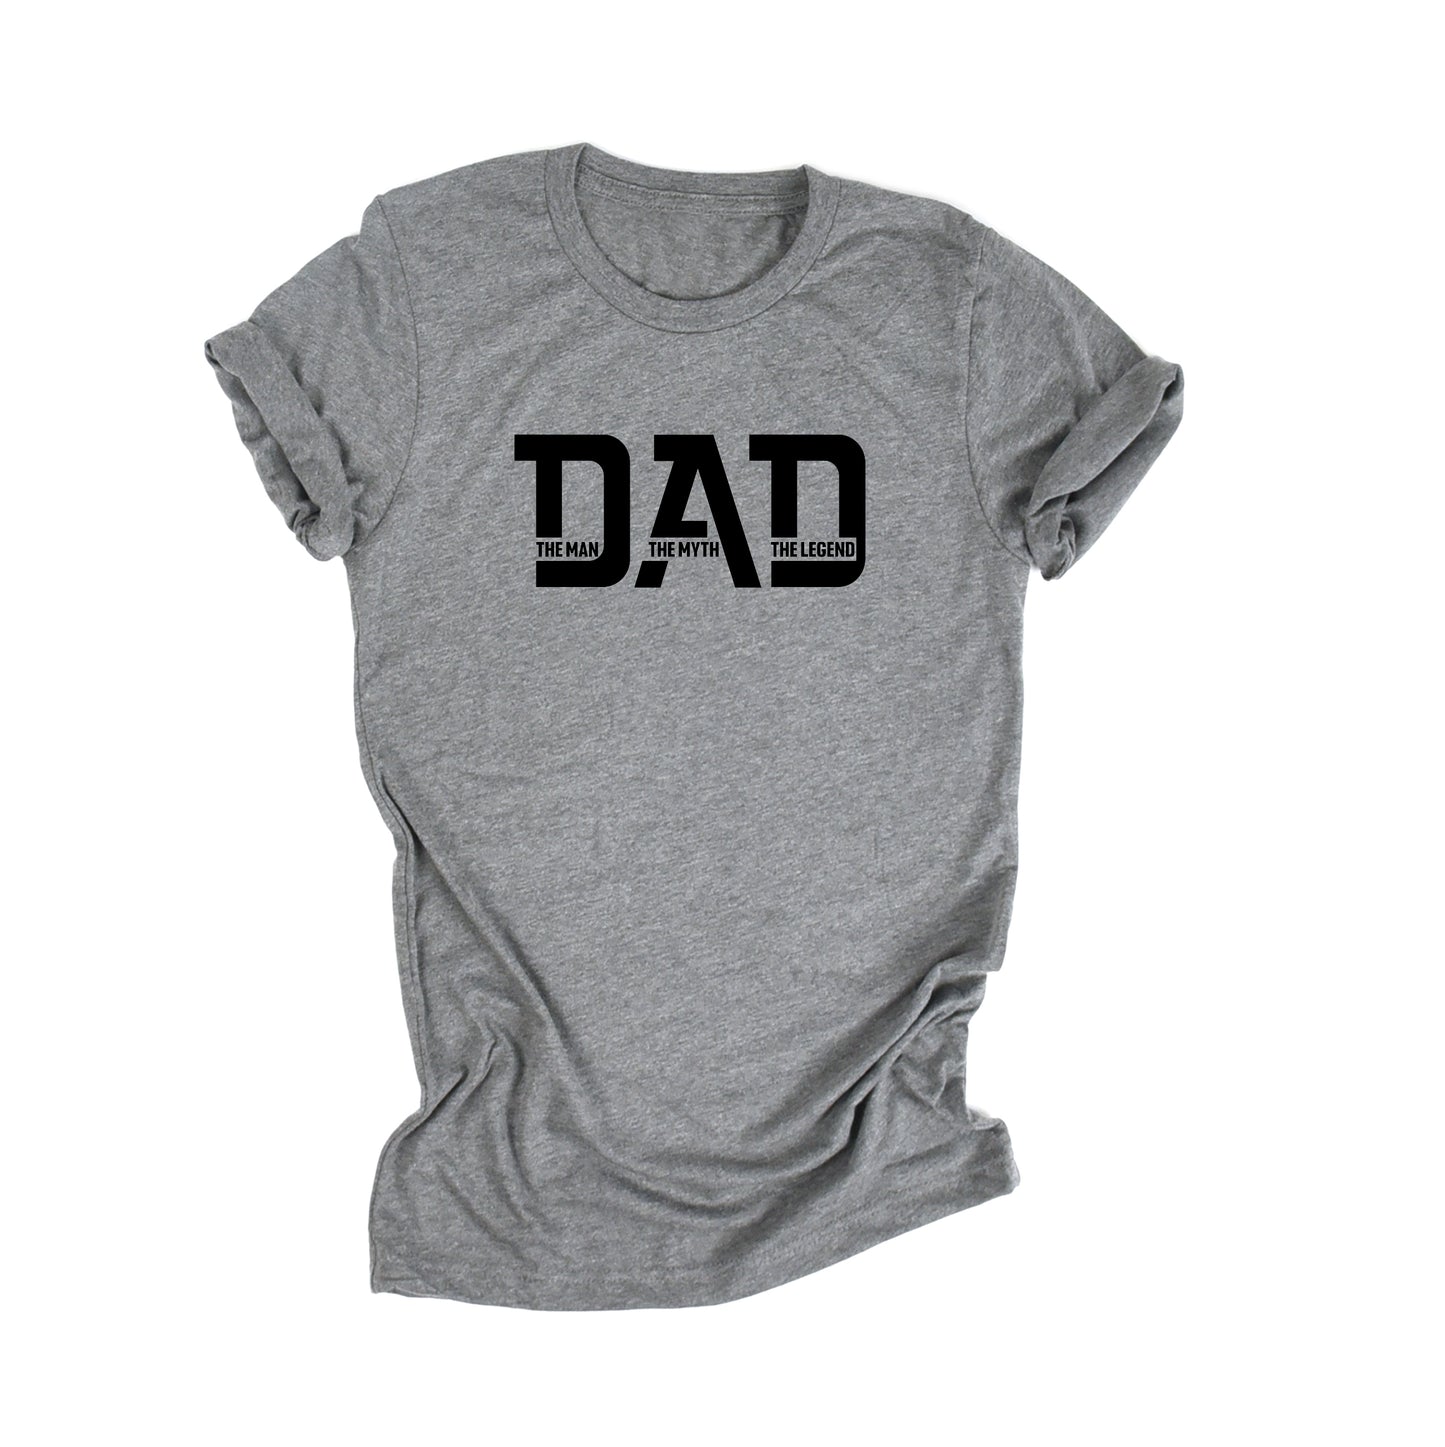 Dad: The Man, The Myth, The Legend T-Shirt